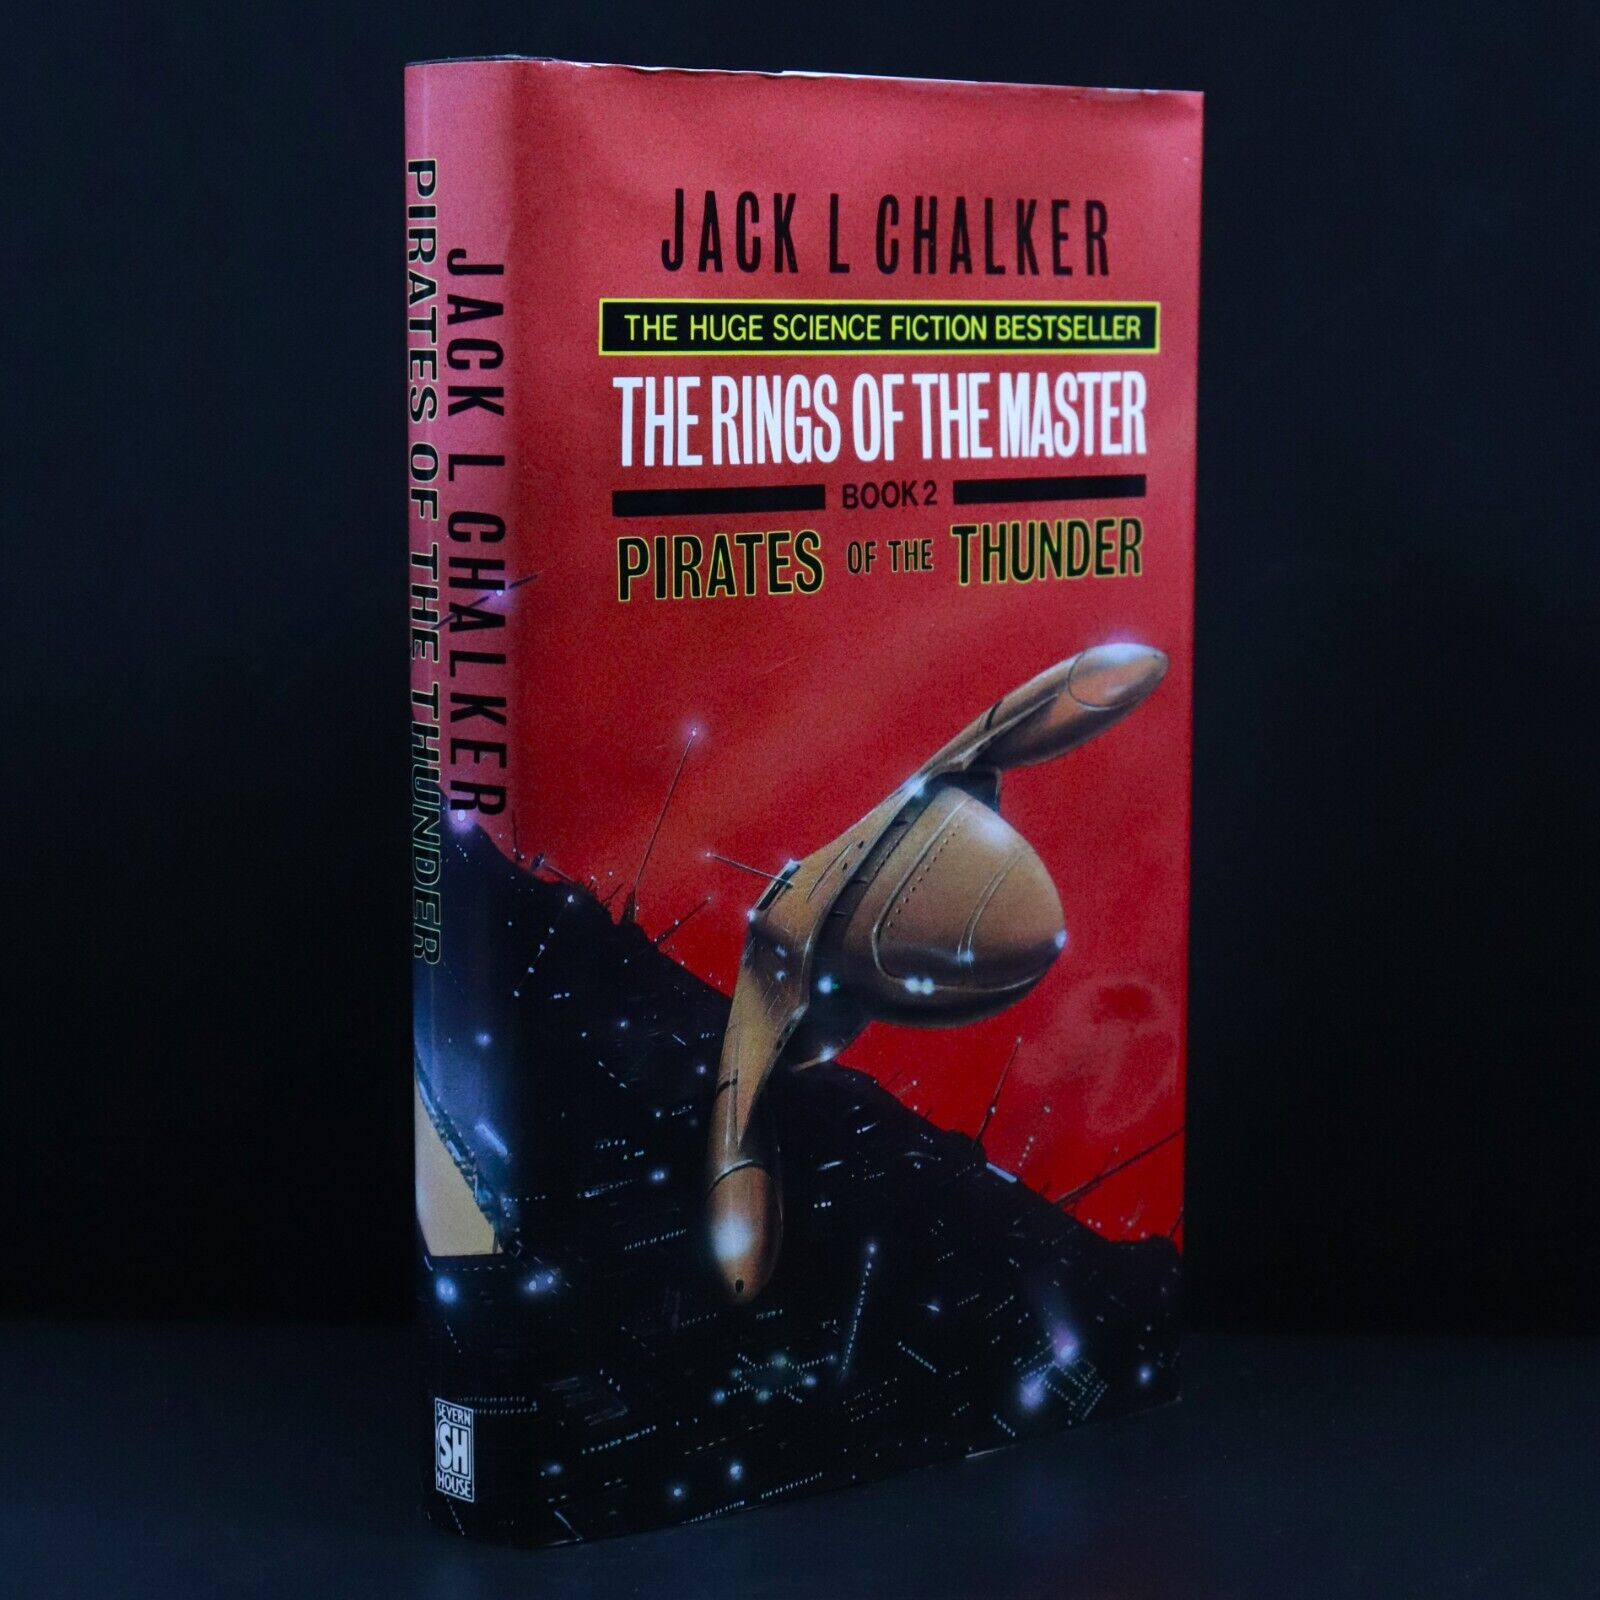 1990 Pirates Of The Thunder by JL Chalker Science Fiction Book Rings Of Master